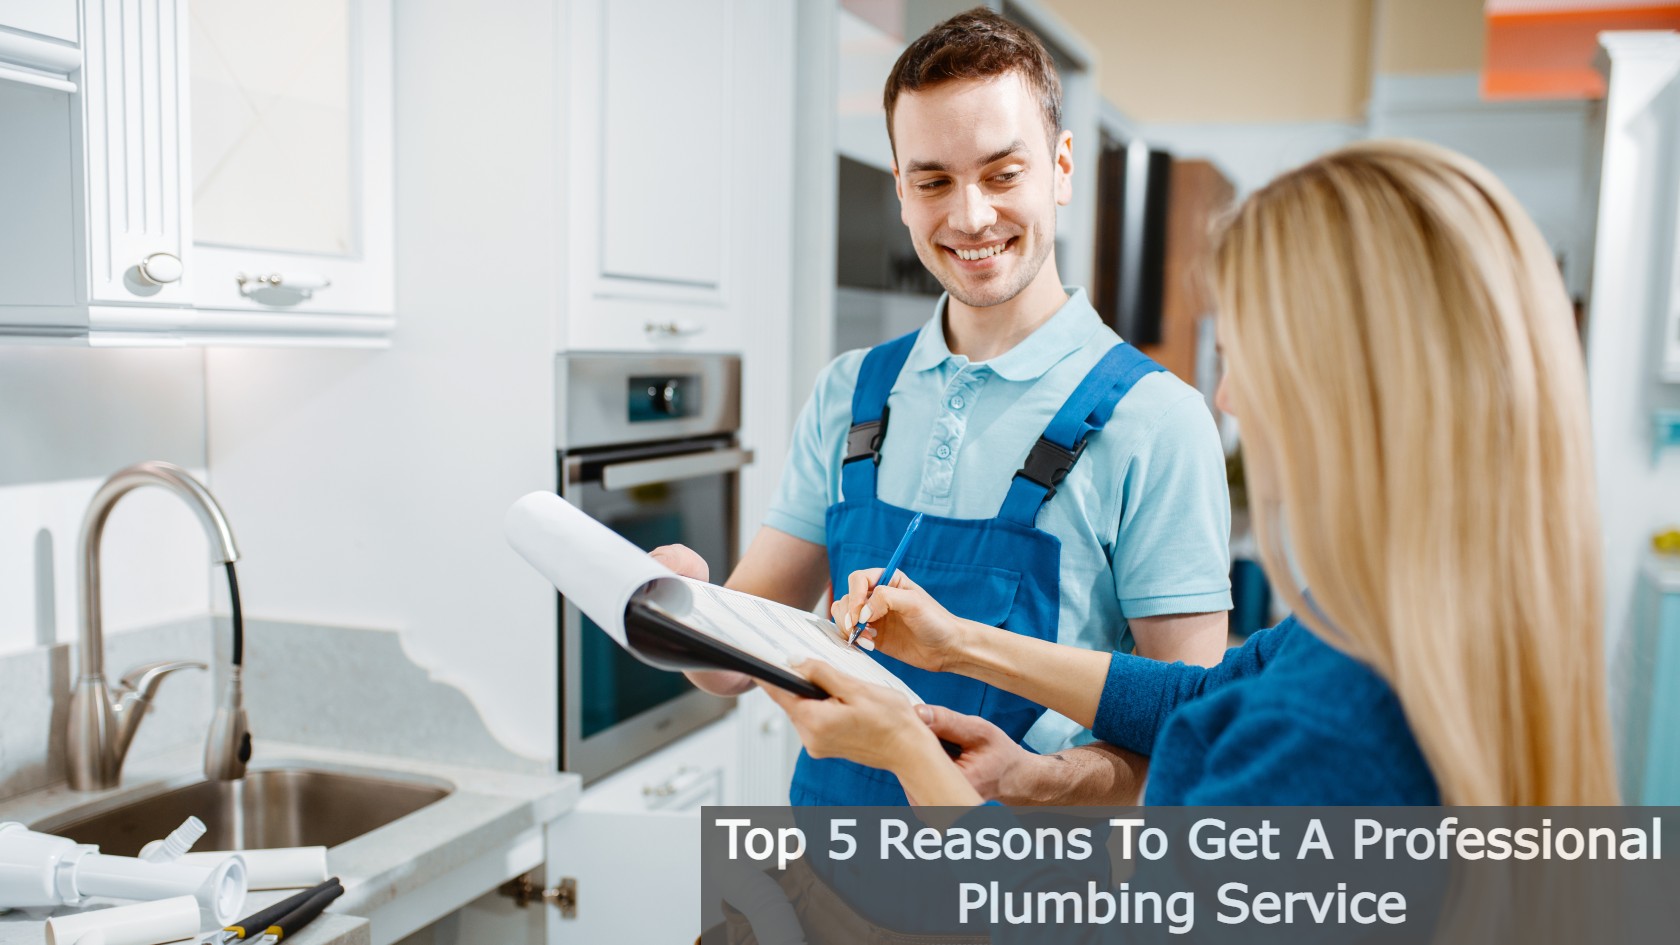 Top 5 Reasons To Get A Professional Plumbing Service